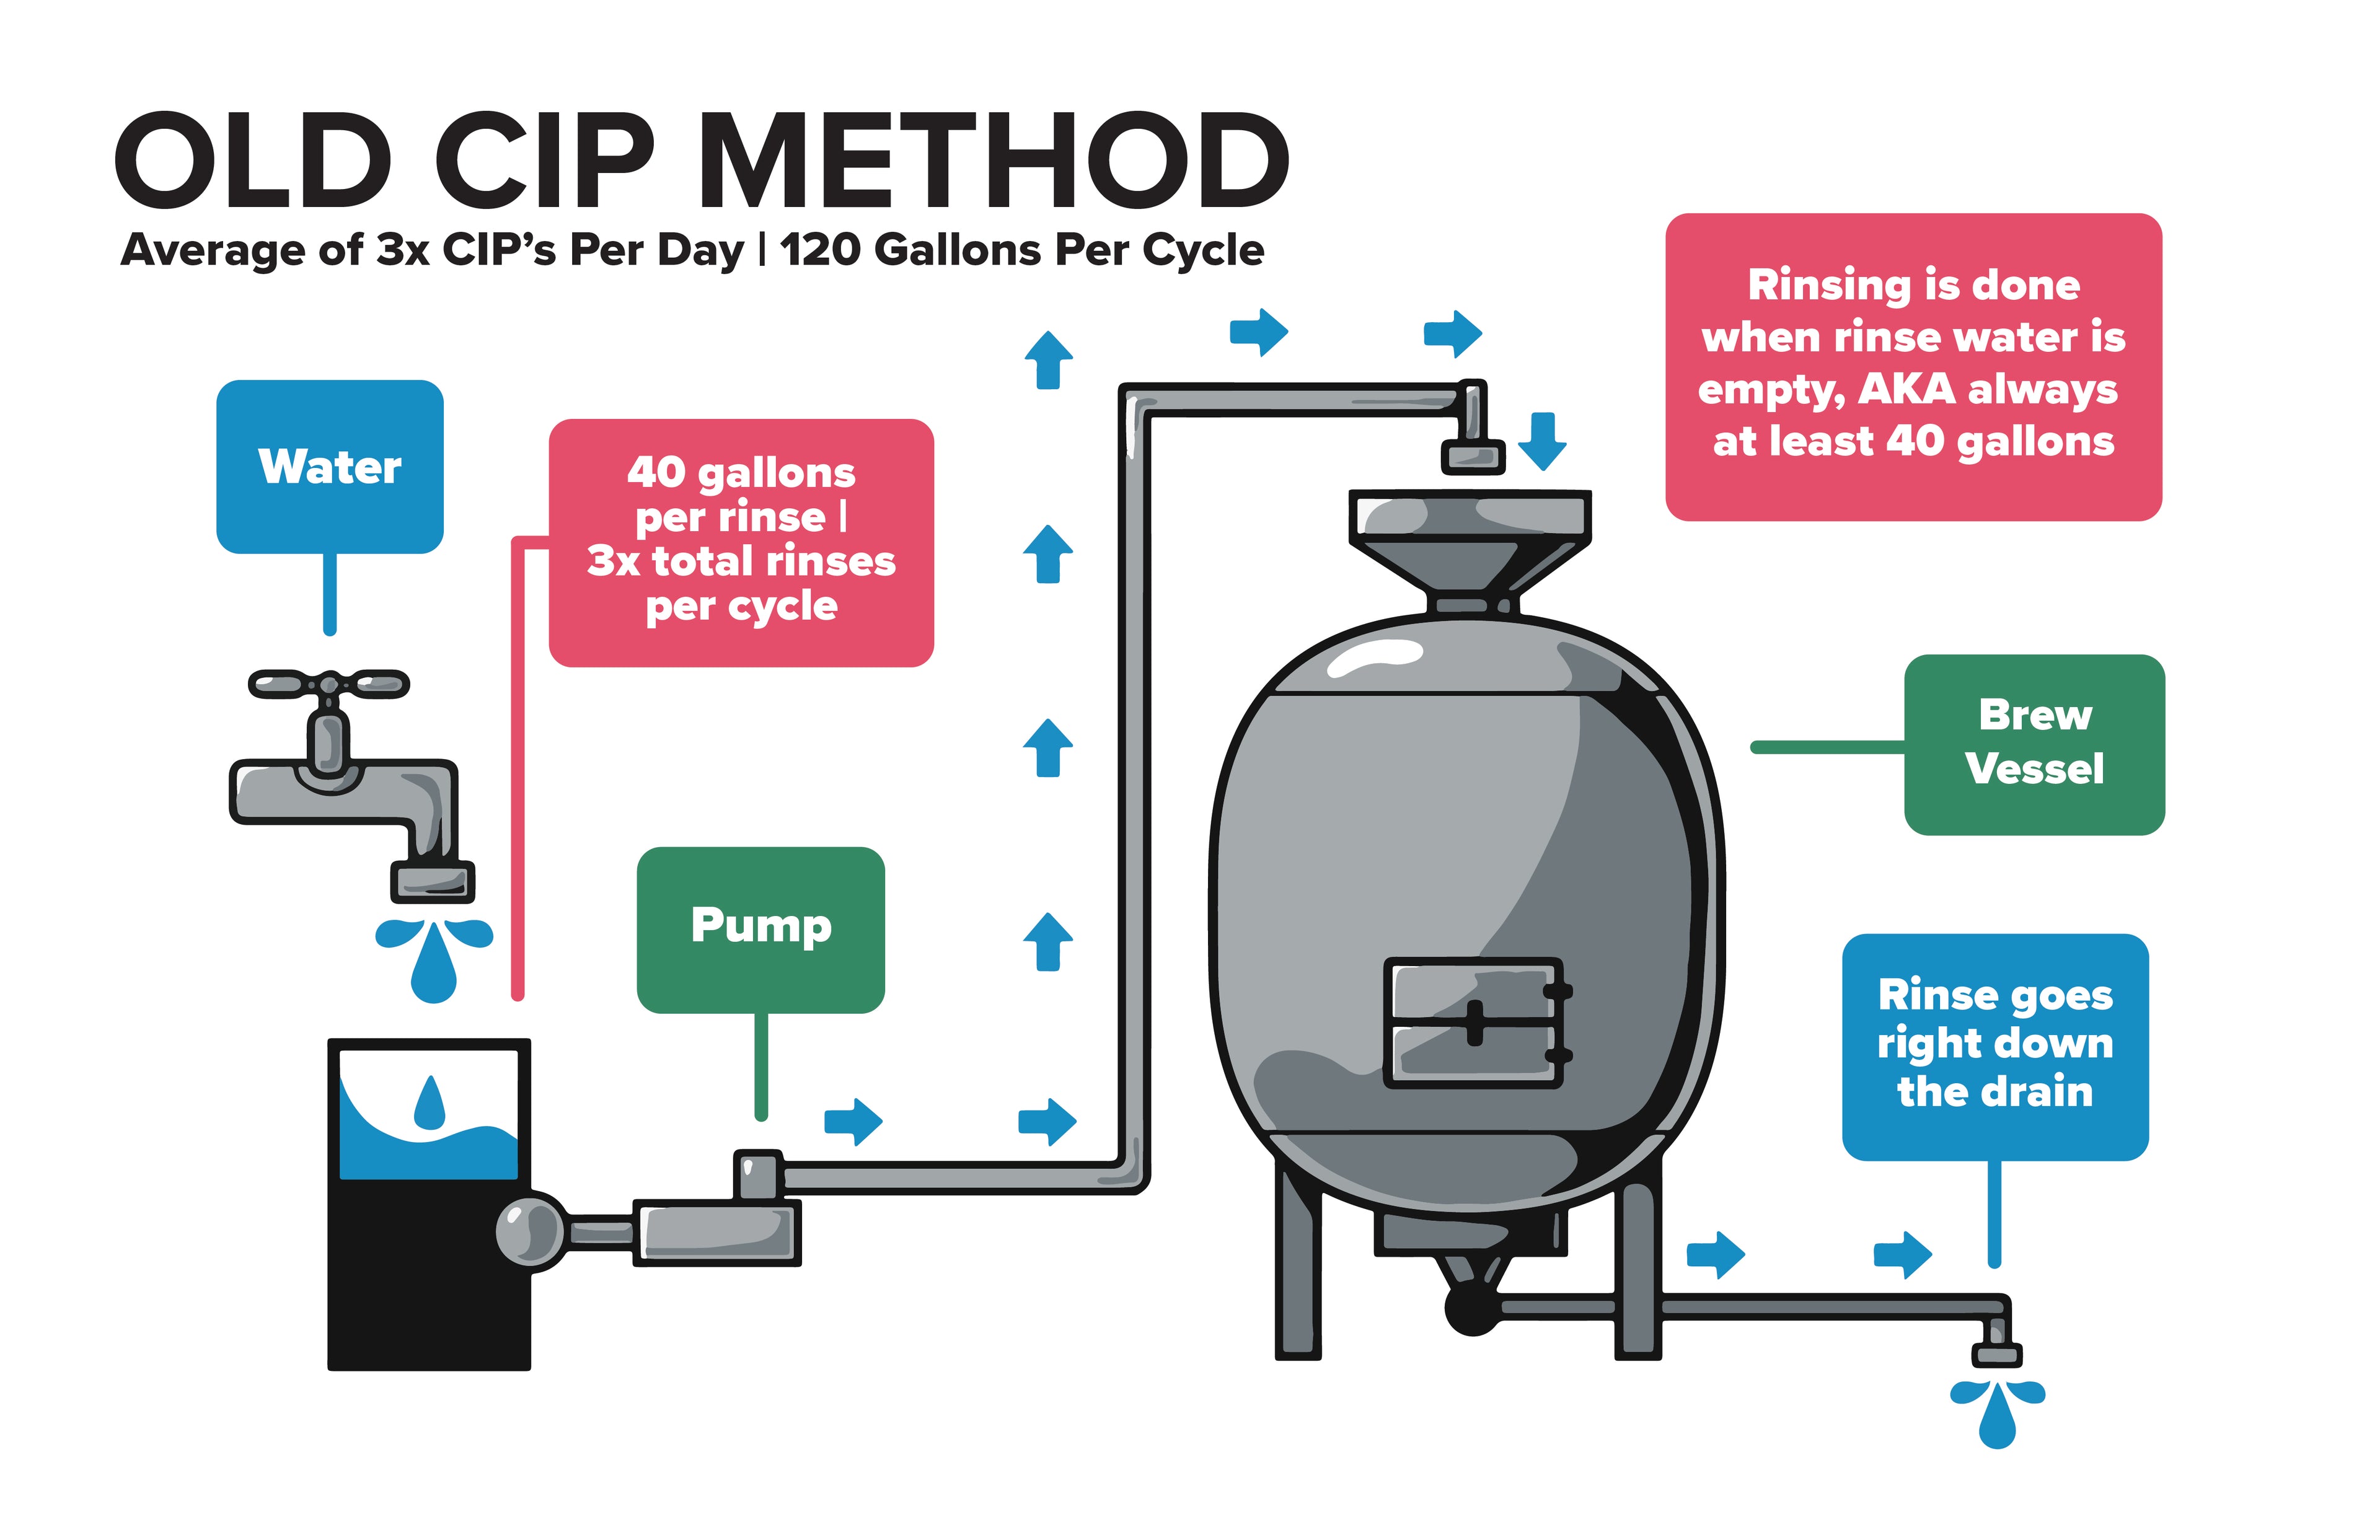 Graphic image explaining old CIP method in our brewery.